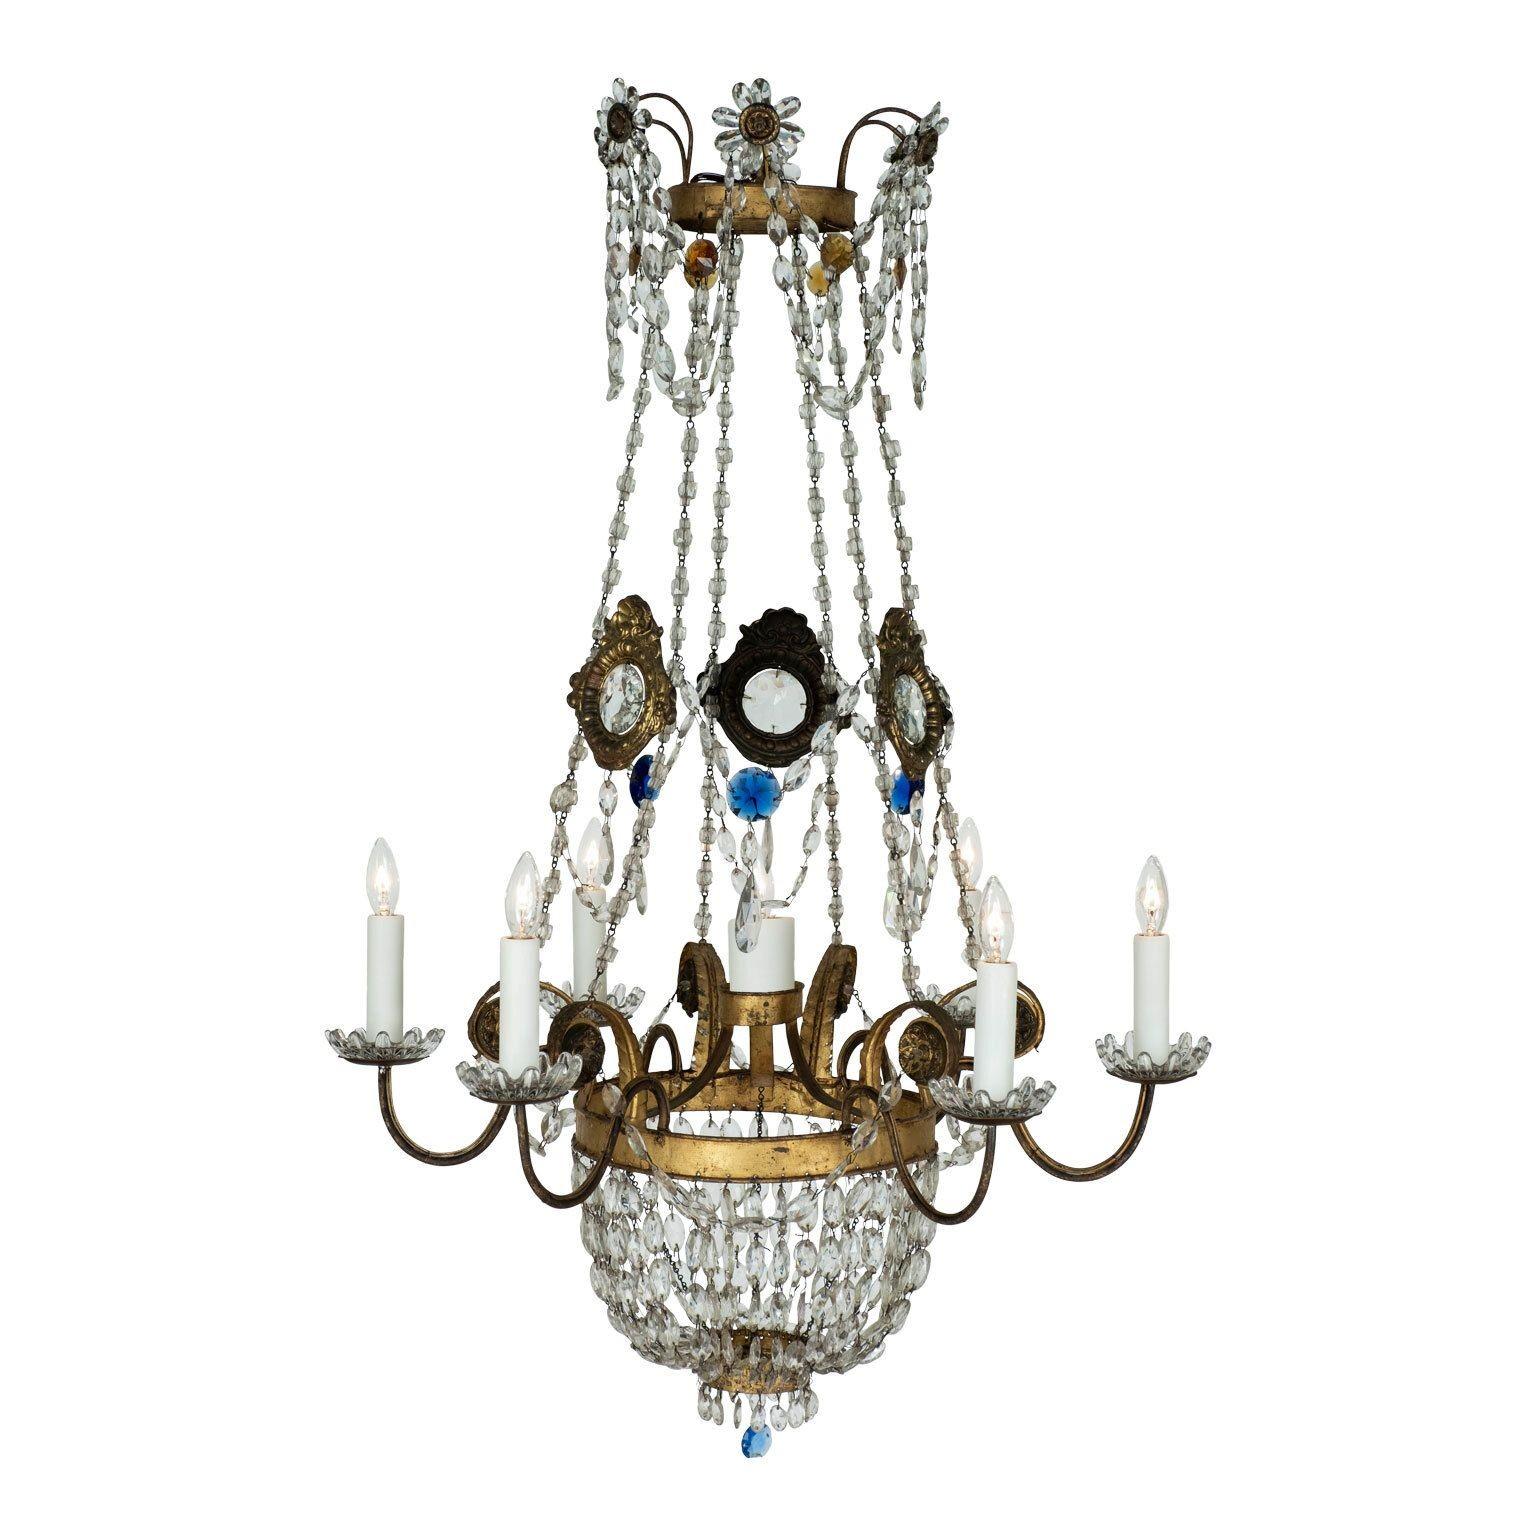 Italian Empire Crystal Beaded and Gilt-Tole Chandelier For Sale 3